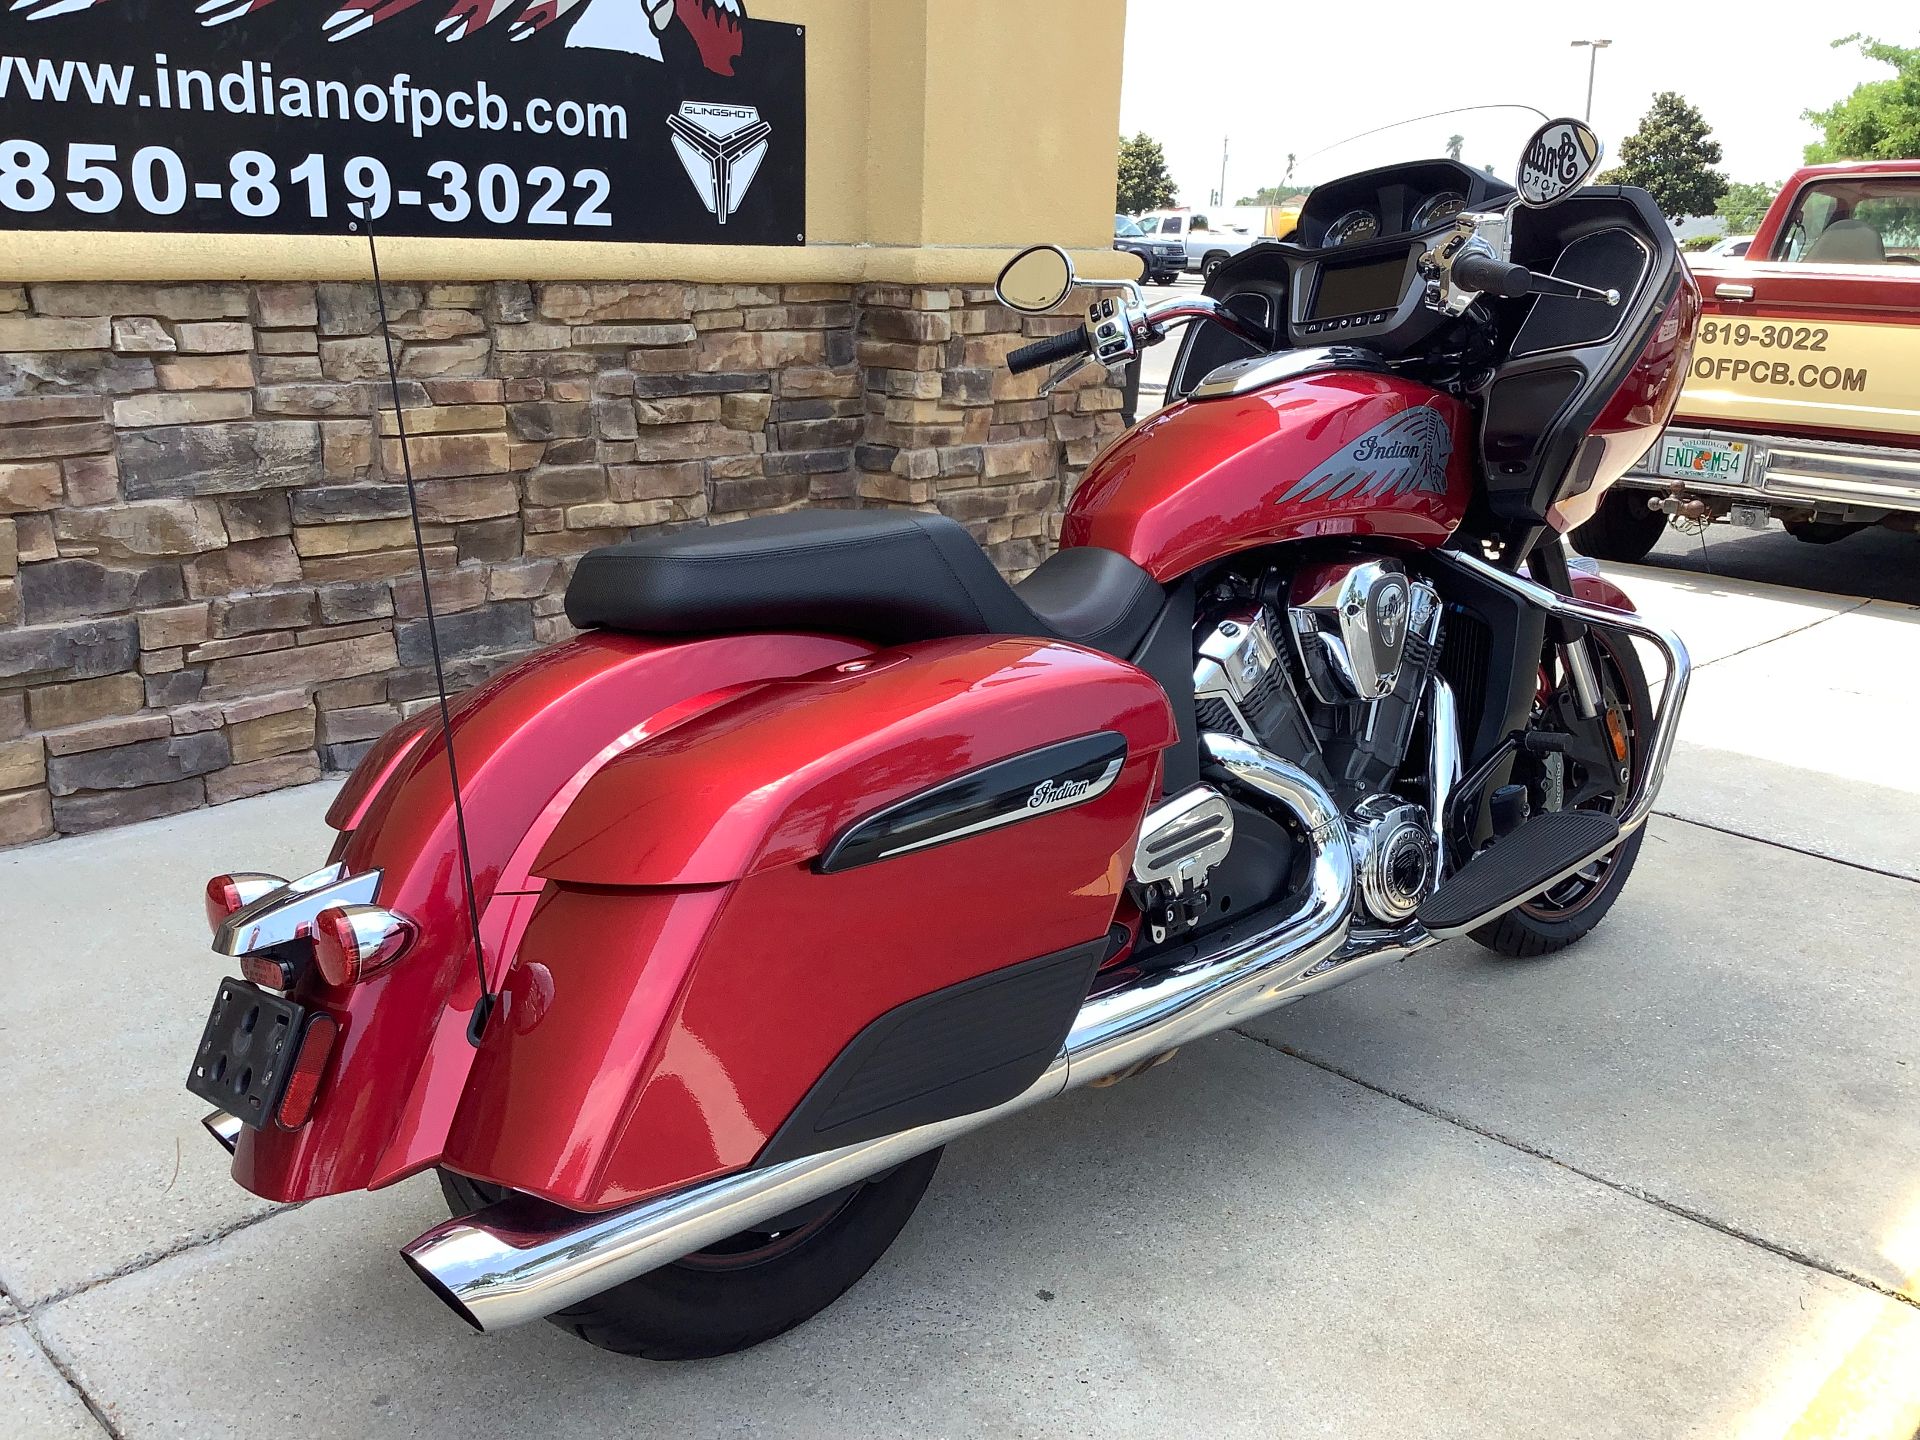 2020 Indian Motorcycle CLALLENGER LIMITED in Panama City Beach, Florida - Photo 3